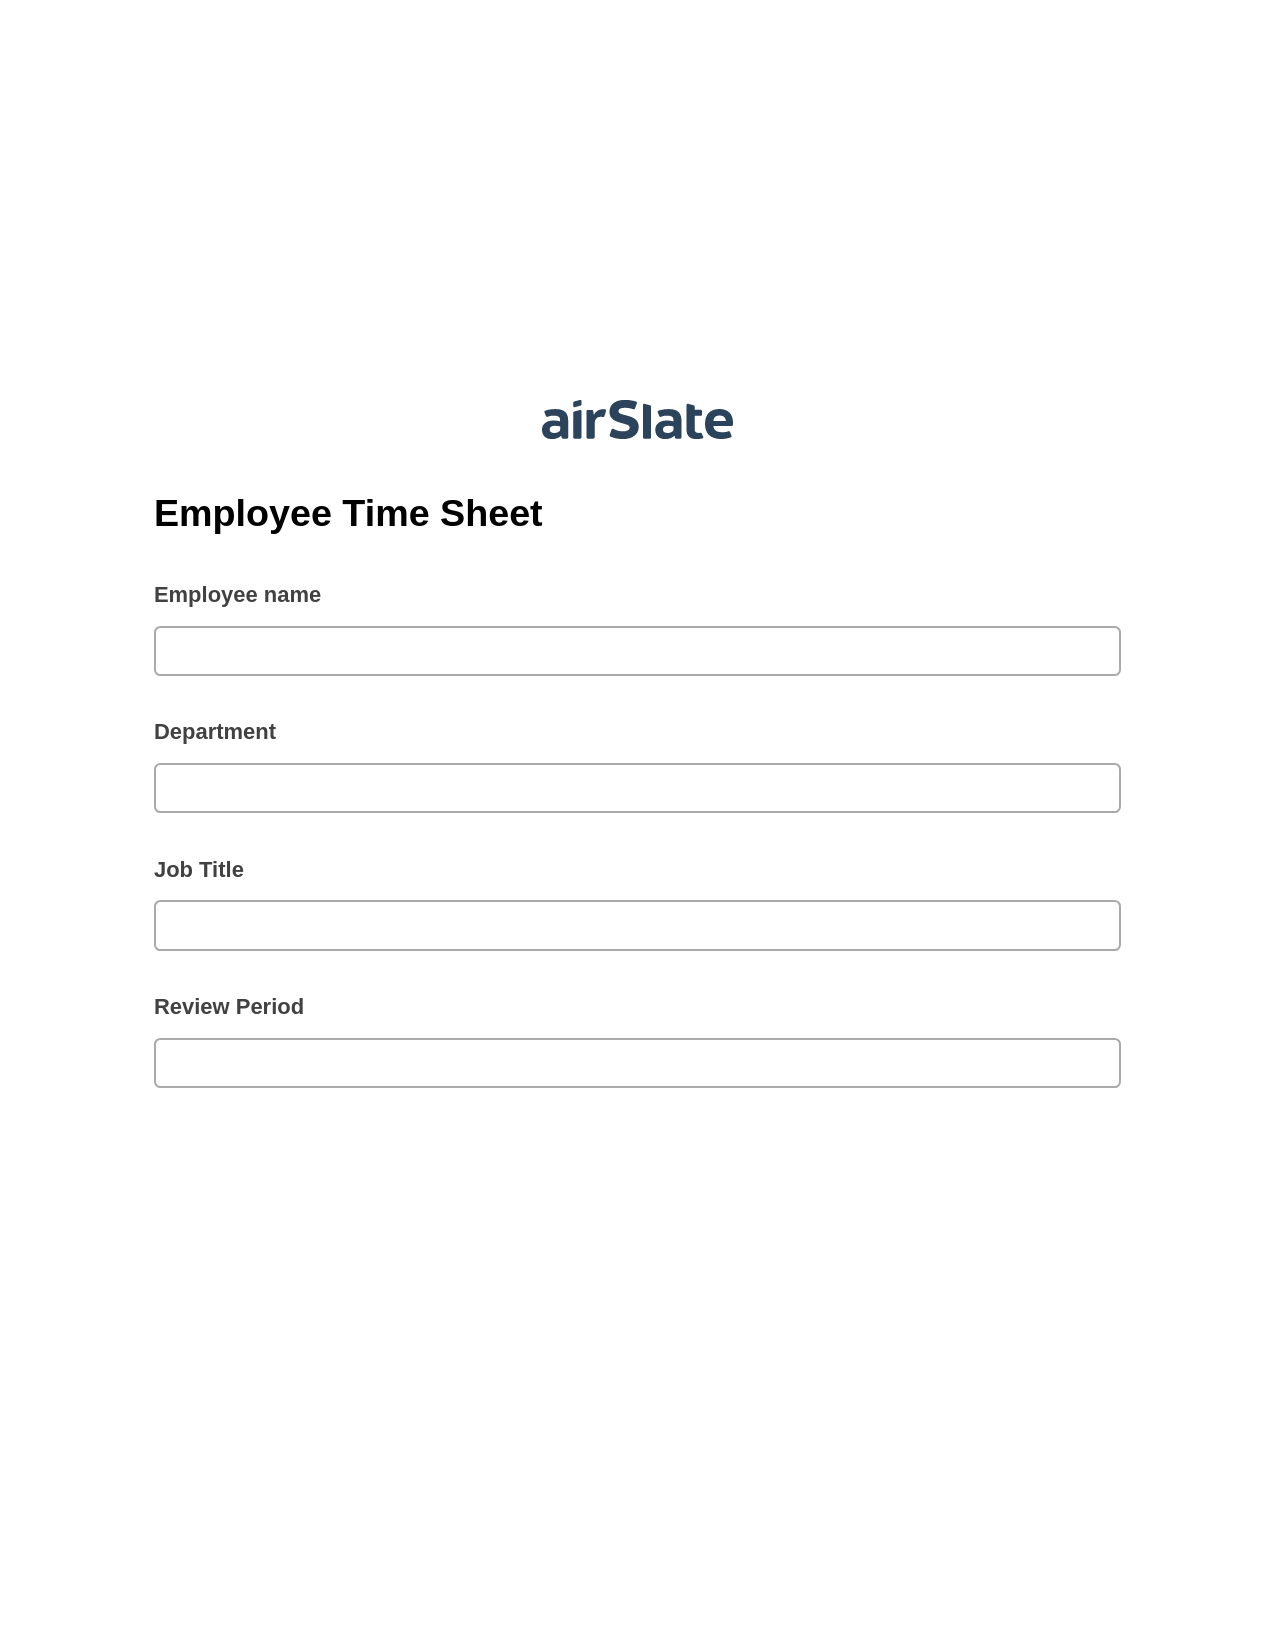 Employee Time Sheet Pre-fill from Excel Spreadsheet Bot, Send a Slate with Roles Bot, Export to NetSuite Bot